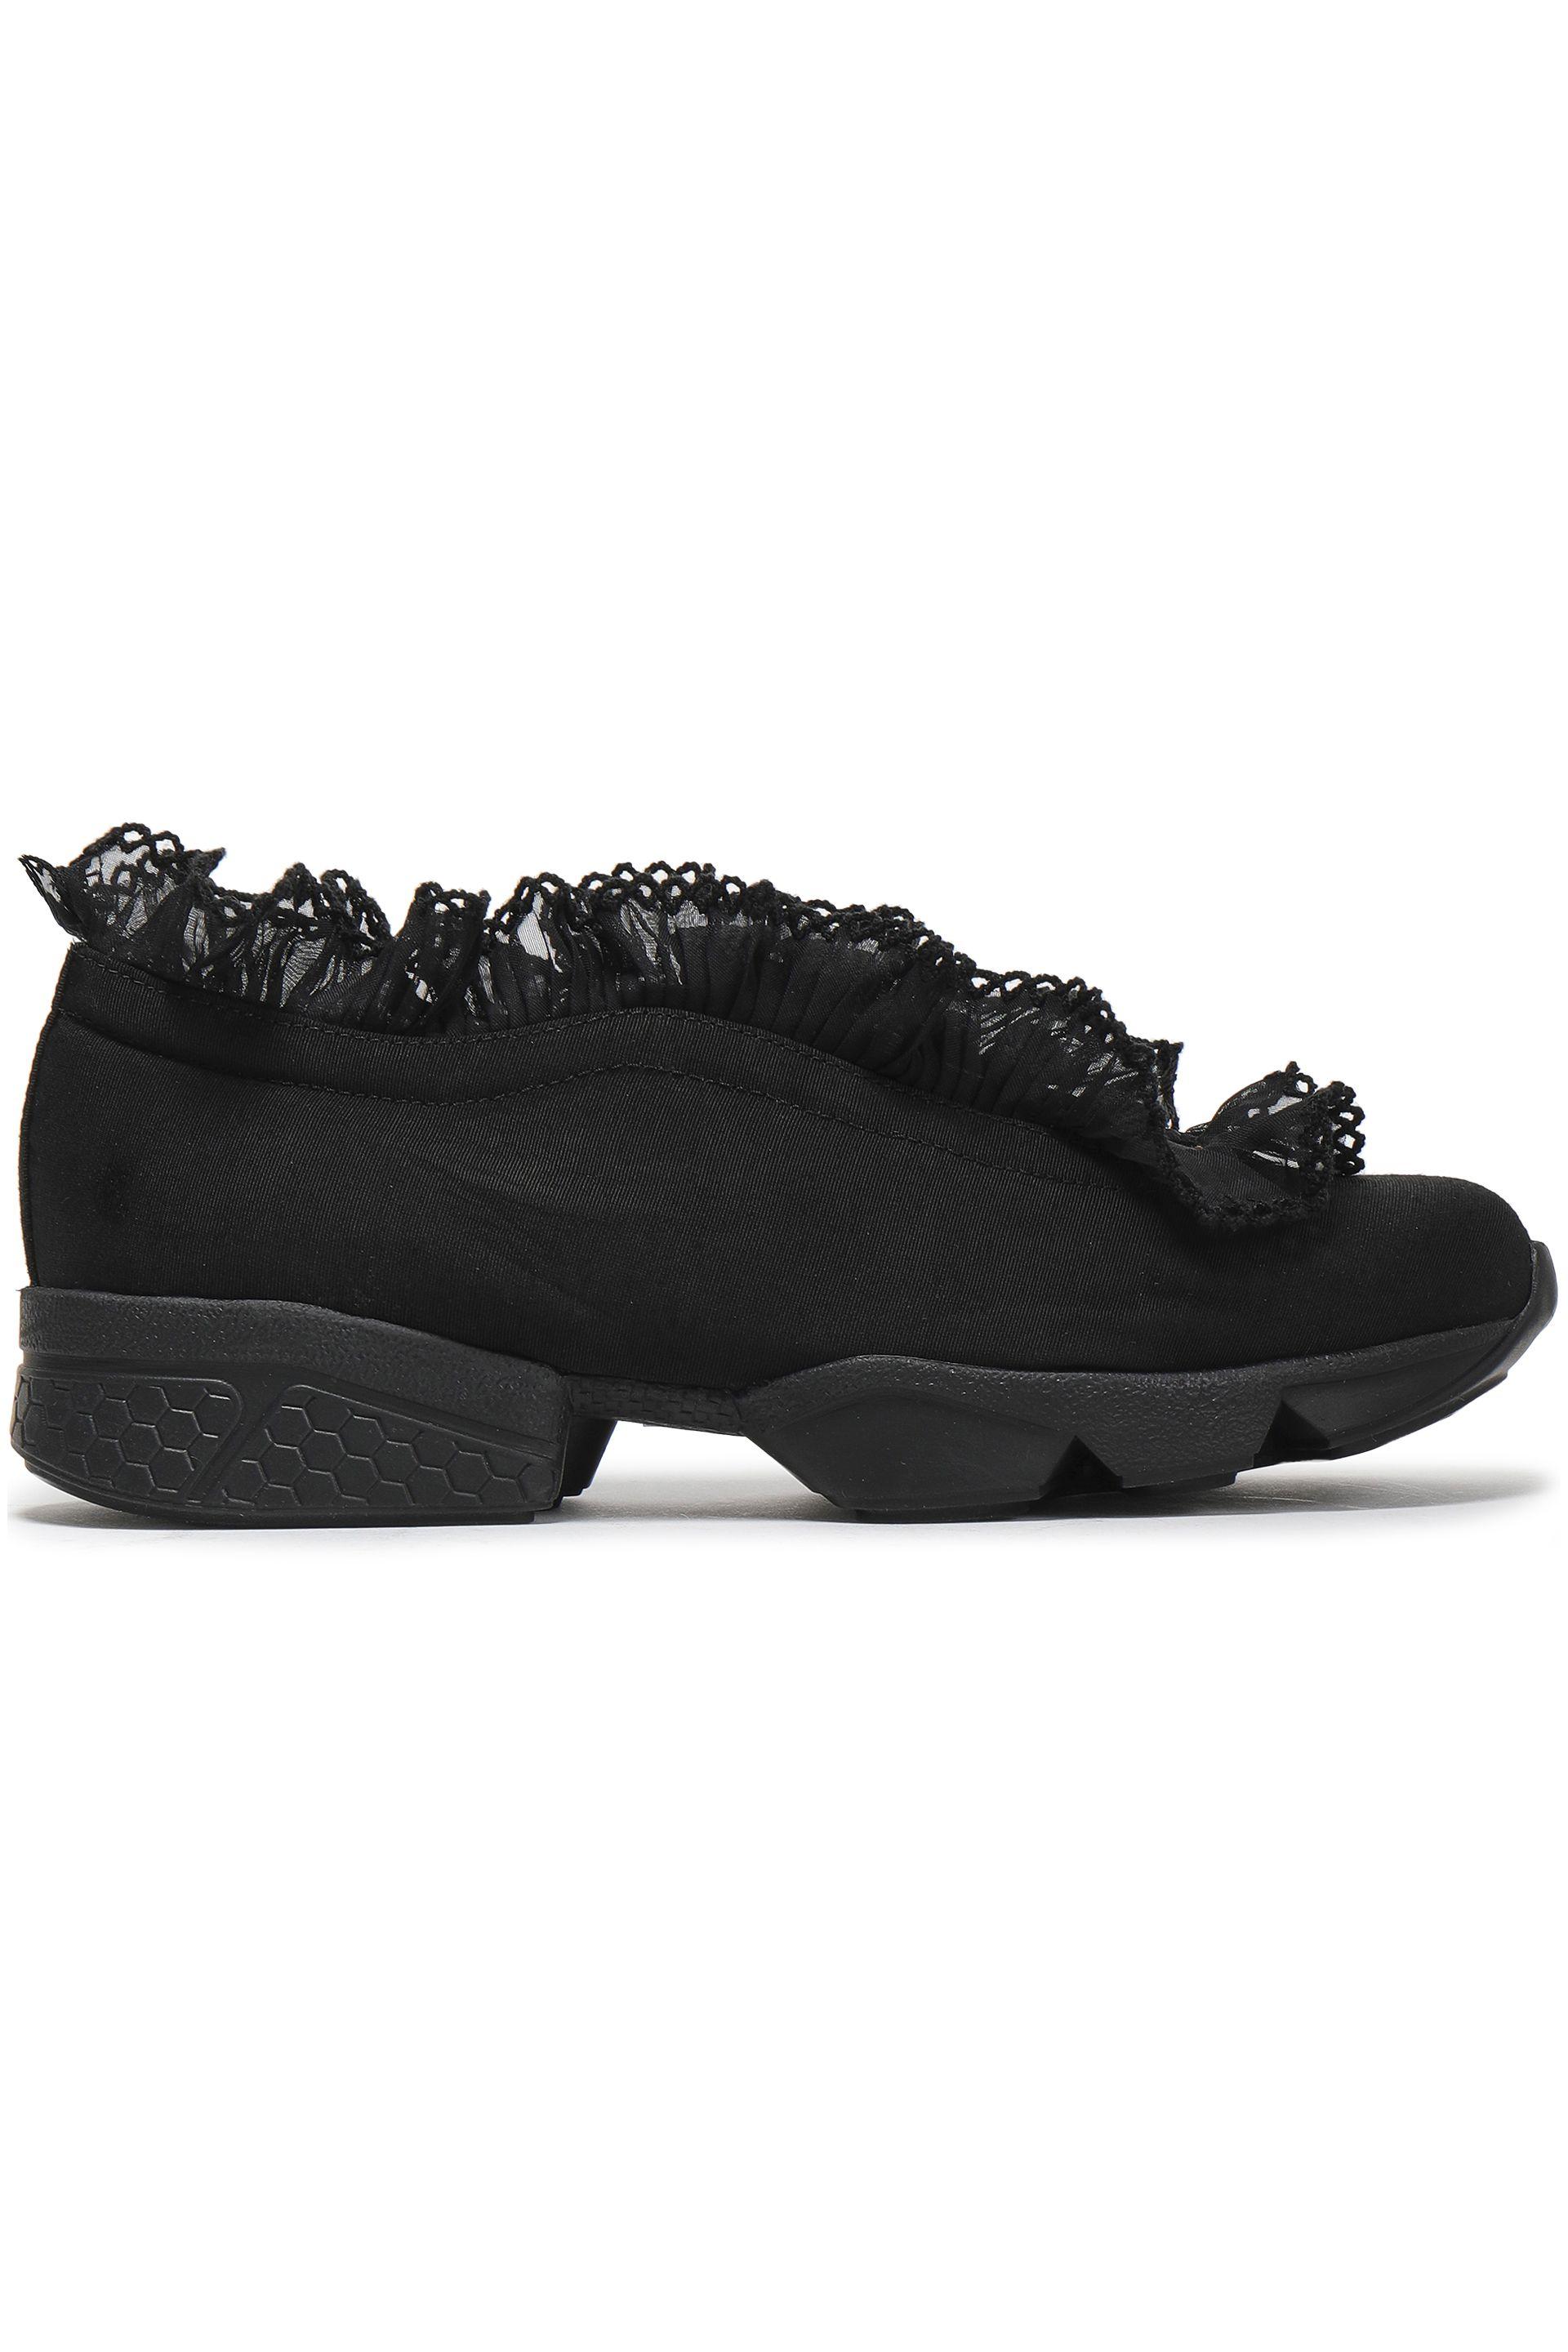 Ganni Leather Harriet Ruffle-trimmed Satin-faille Sneakers in Black - Lyst